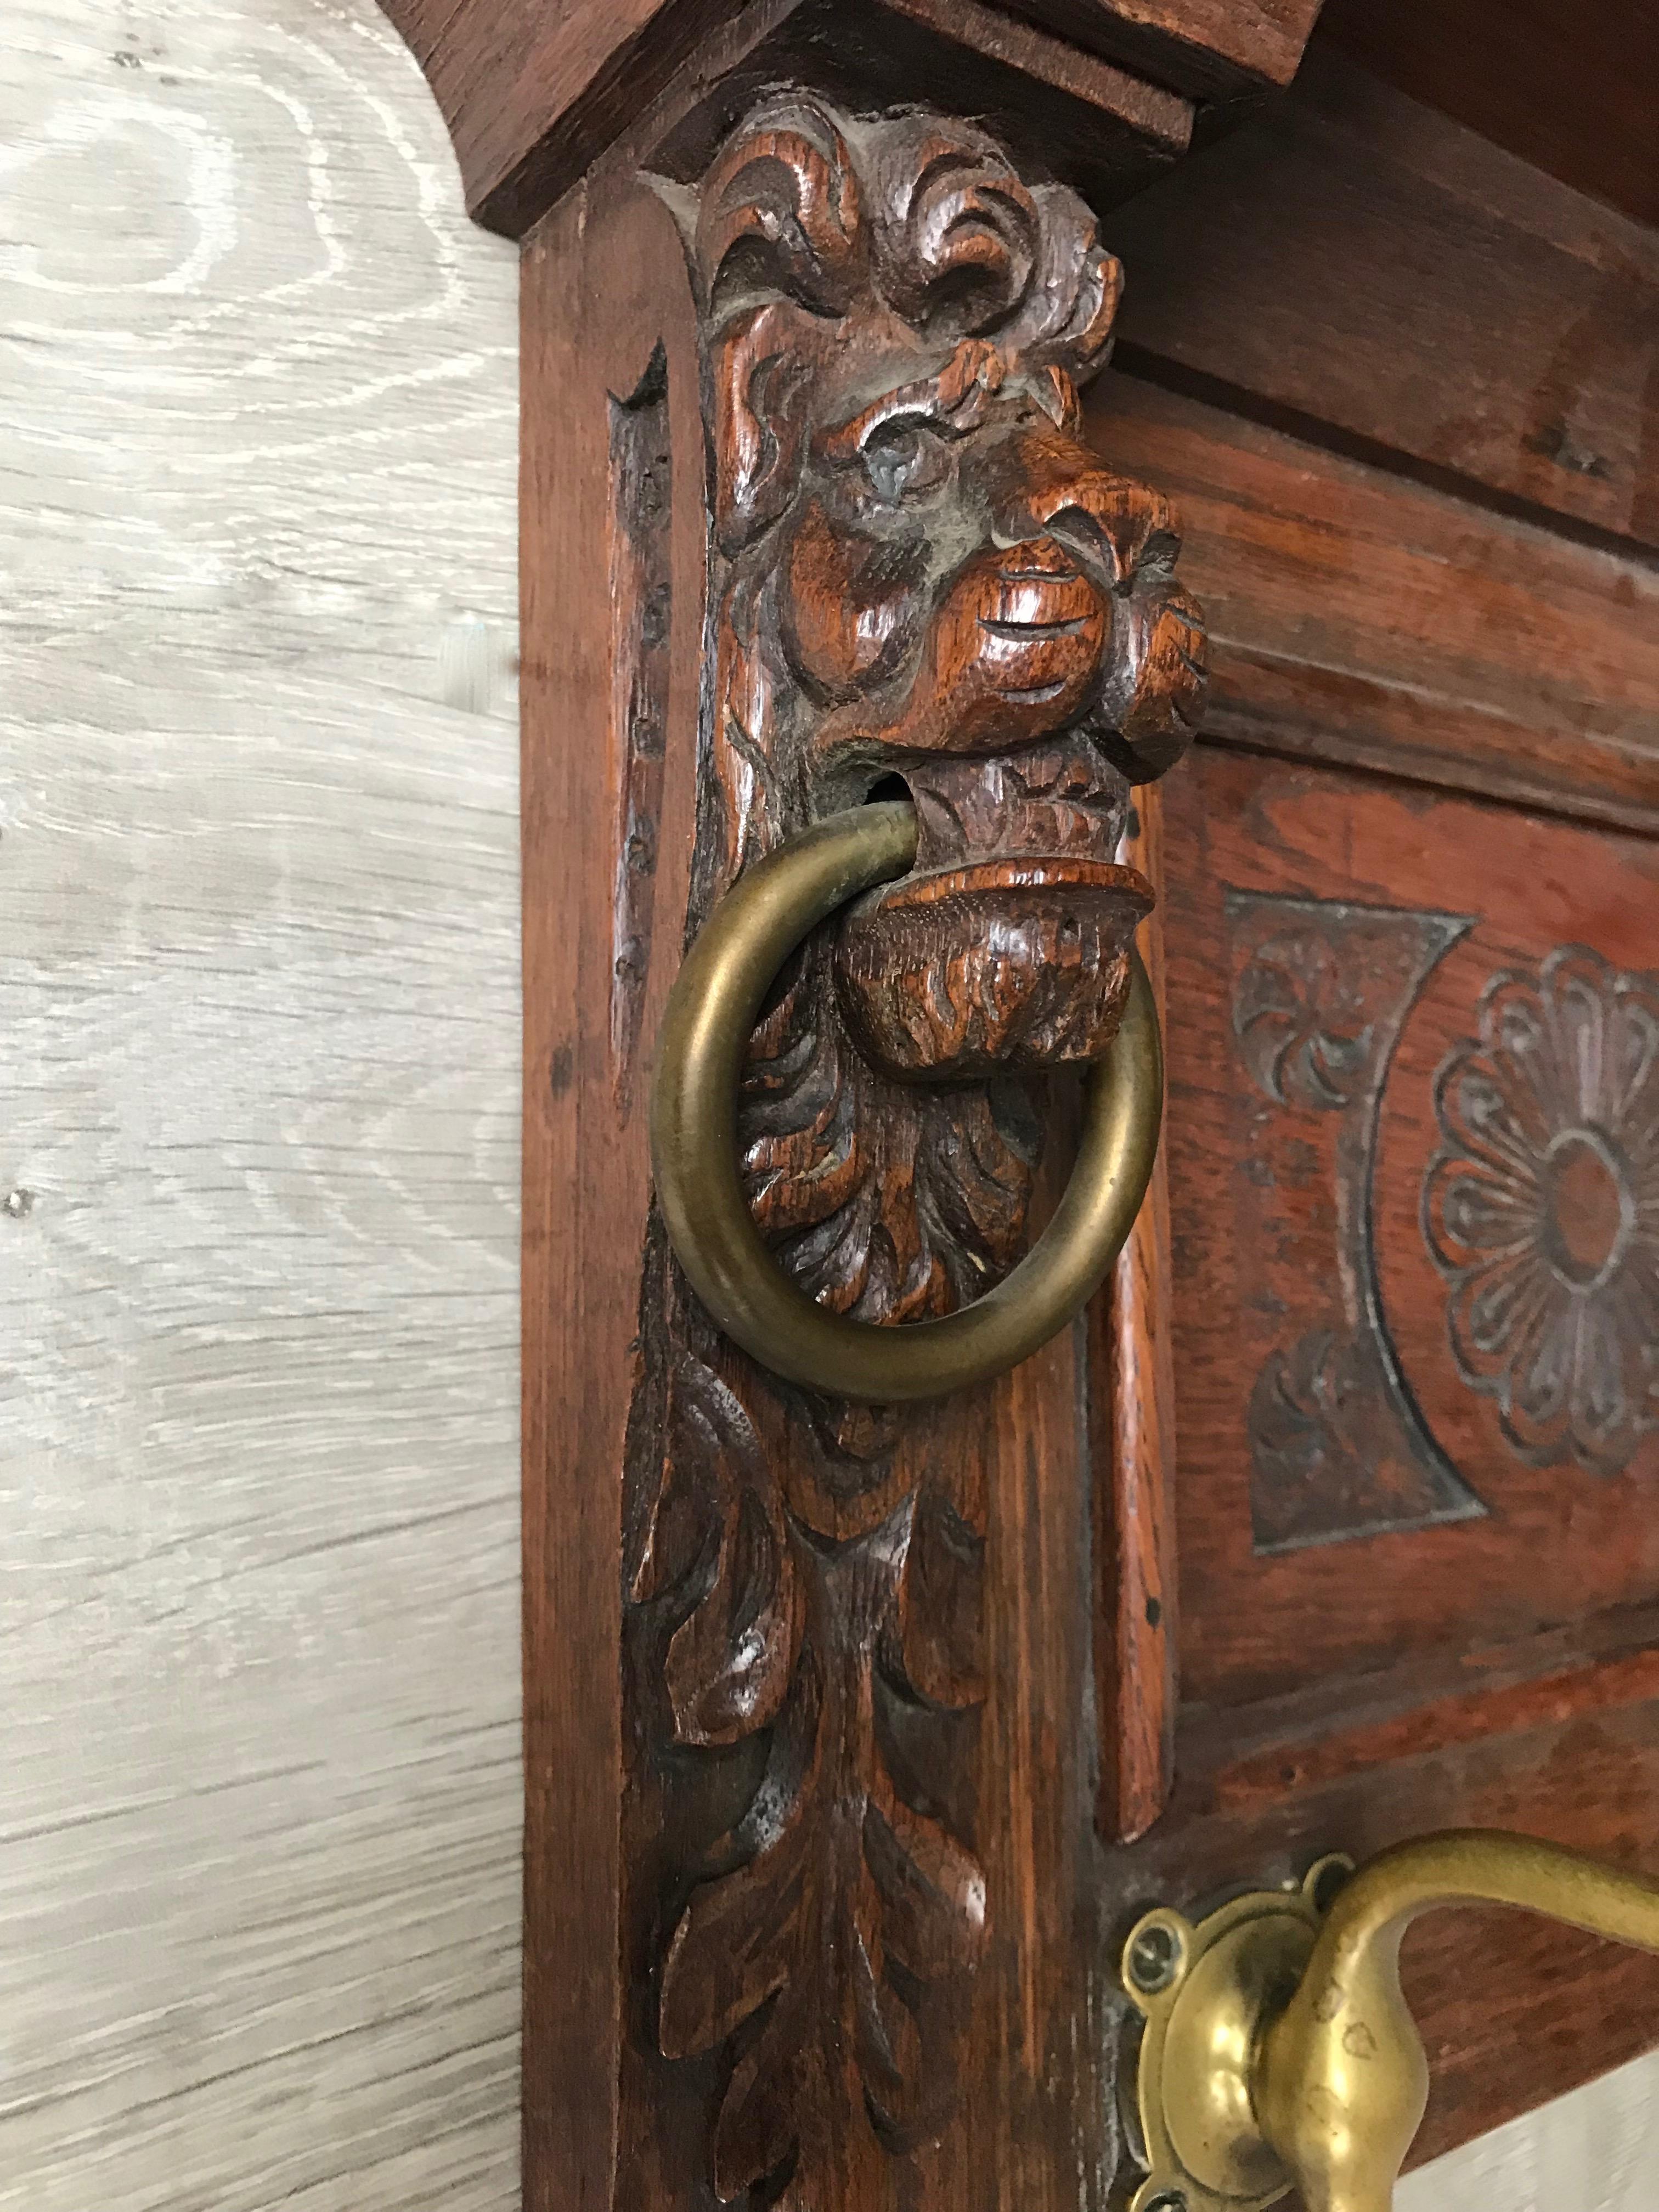 Bronze Small Size Early 1900 Renaissance Revival Wall Coat Rack with Lion Sculptures